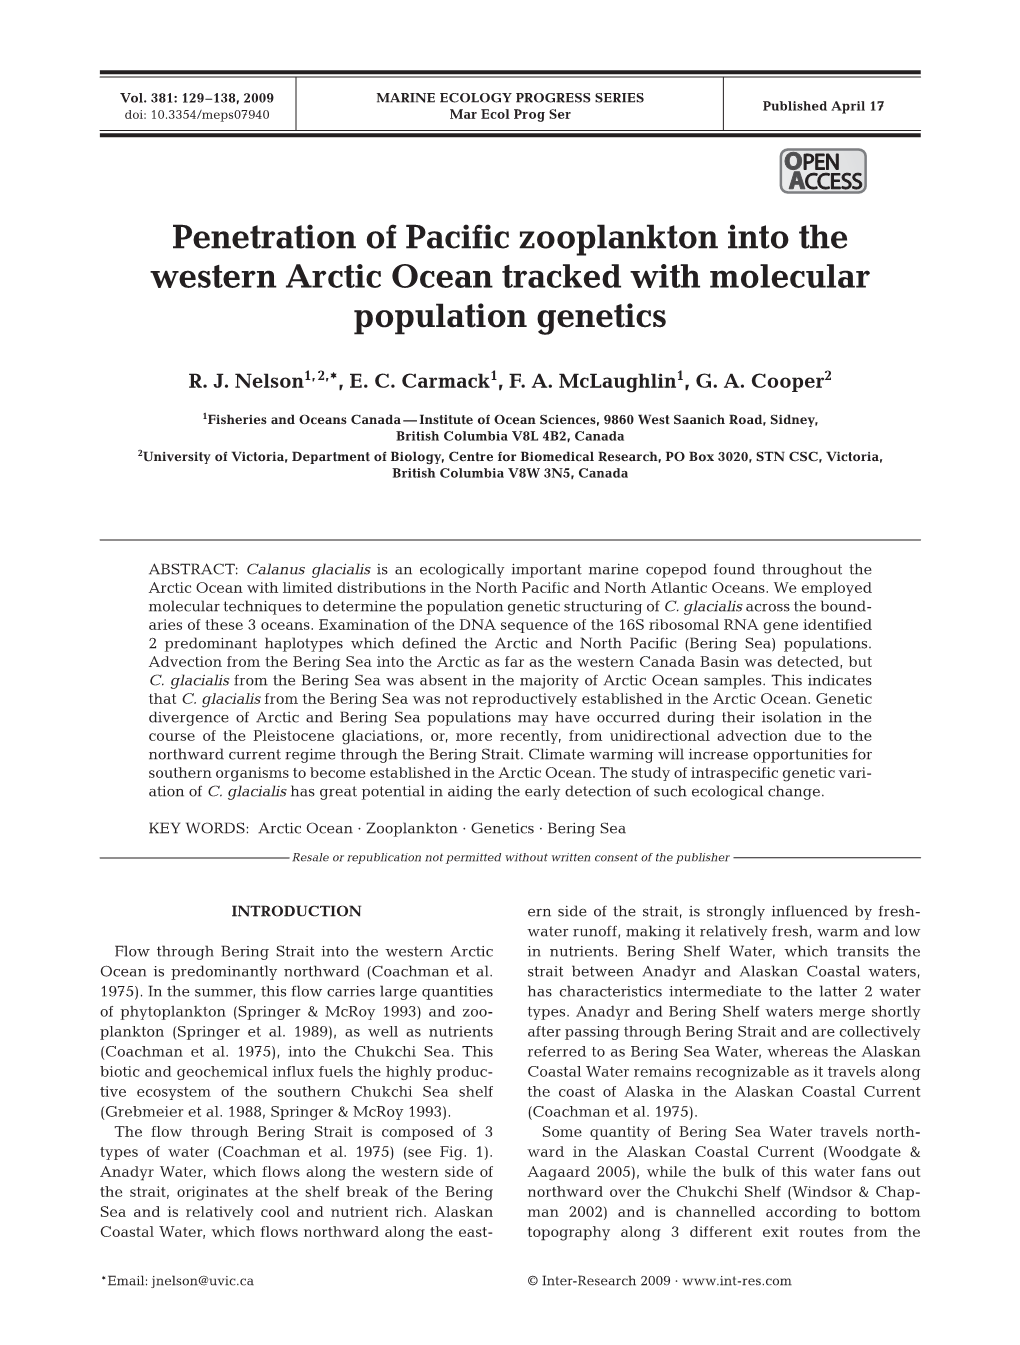 Penetration of Pacific Zooplankton Into the Western Arctic Ocean Tracked with Molecular Population Genetics